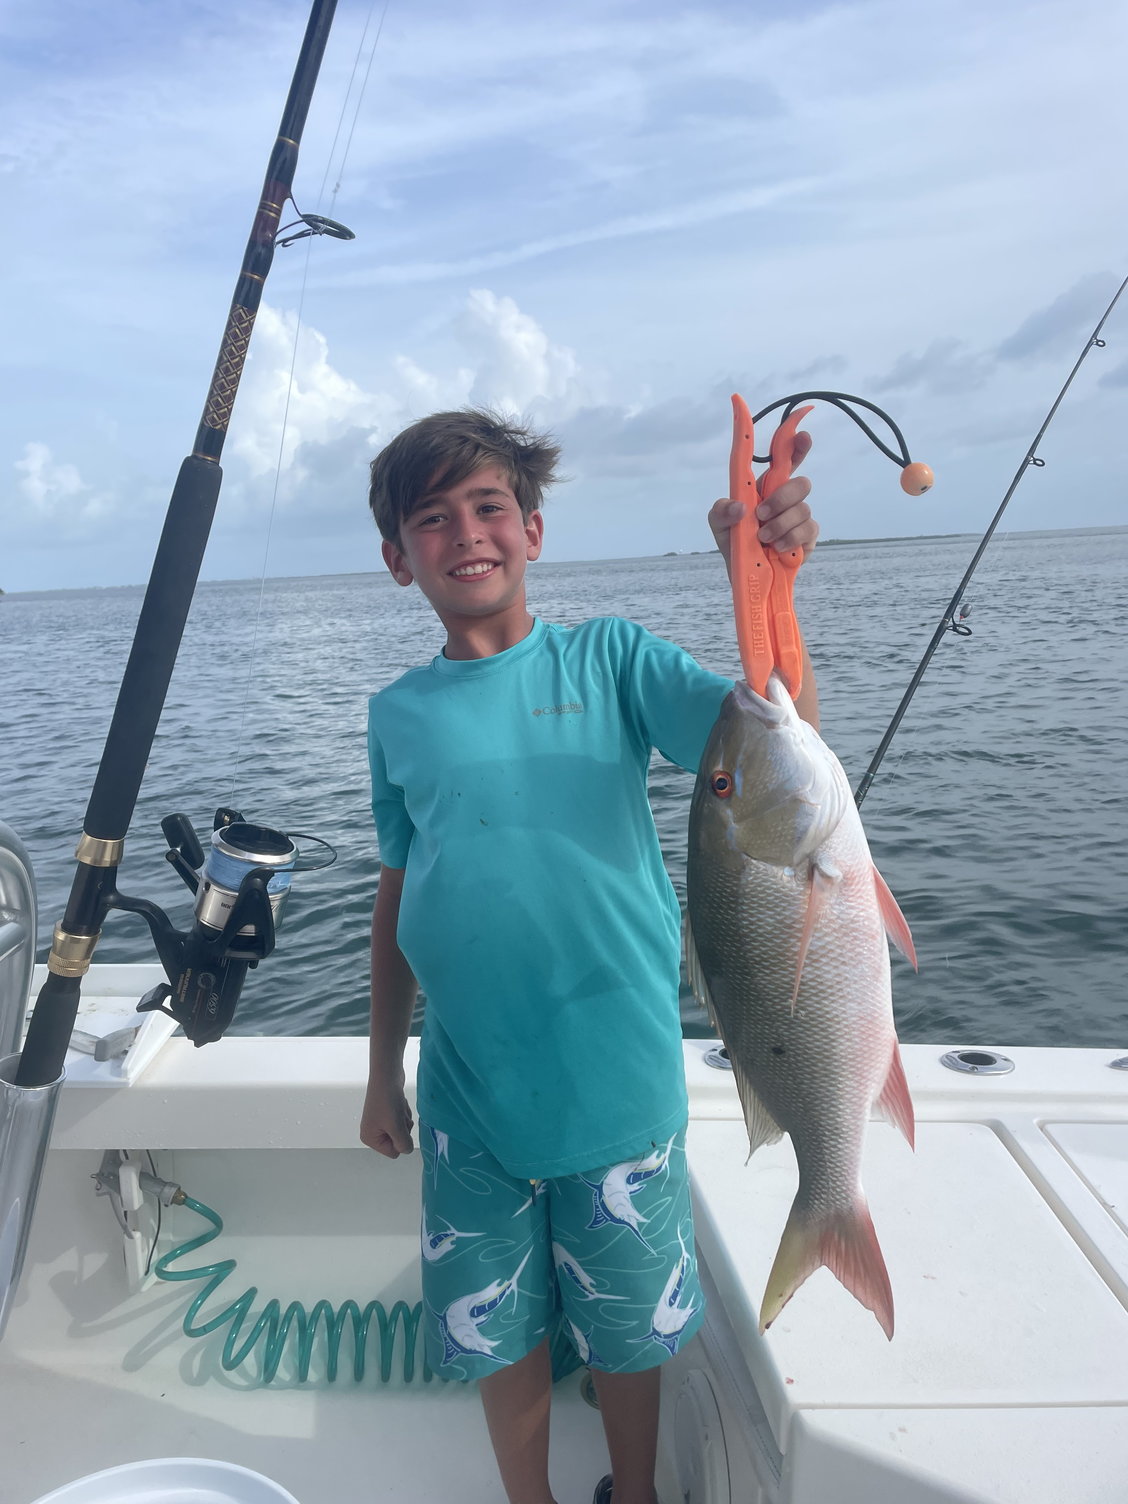 Fishing in the Keys - The Hull Truth - Boating and Fishing Forum